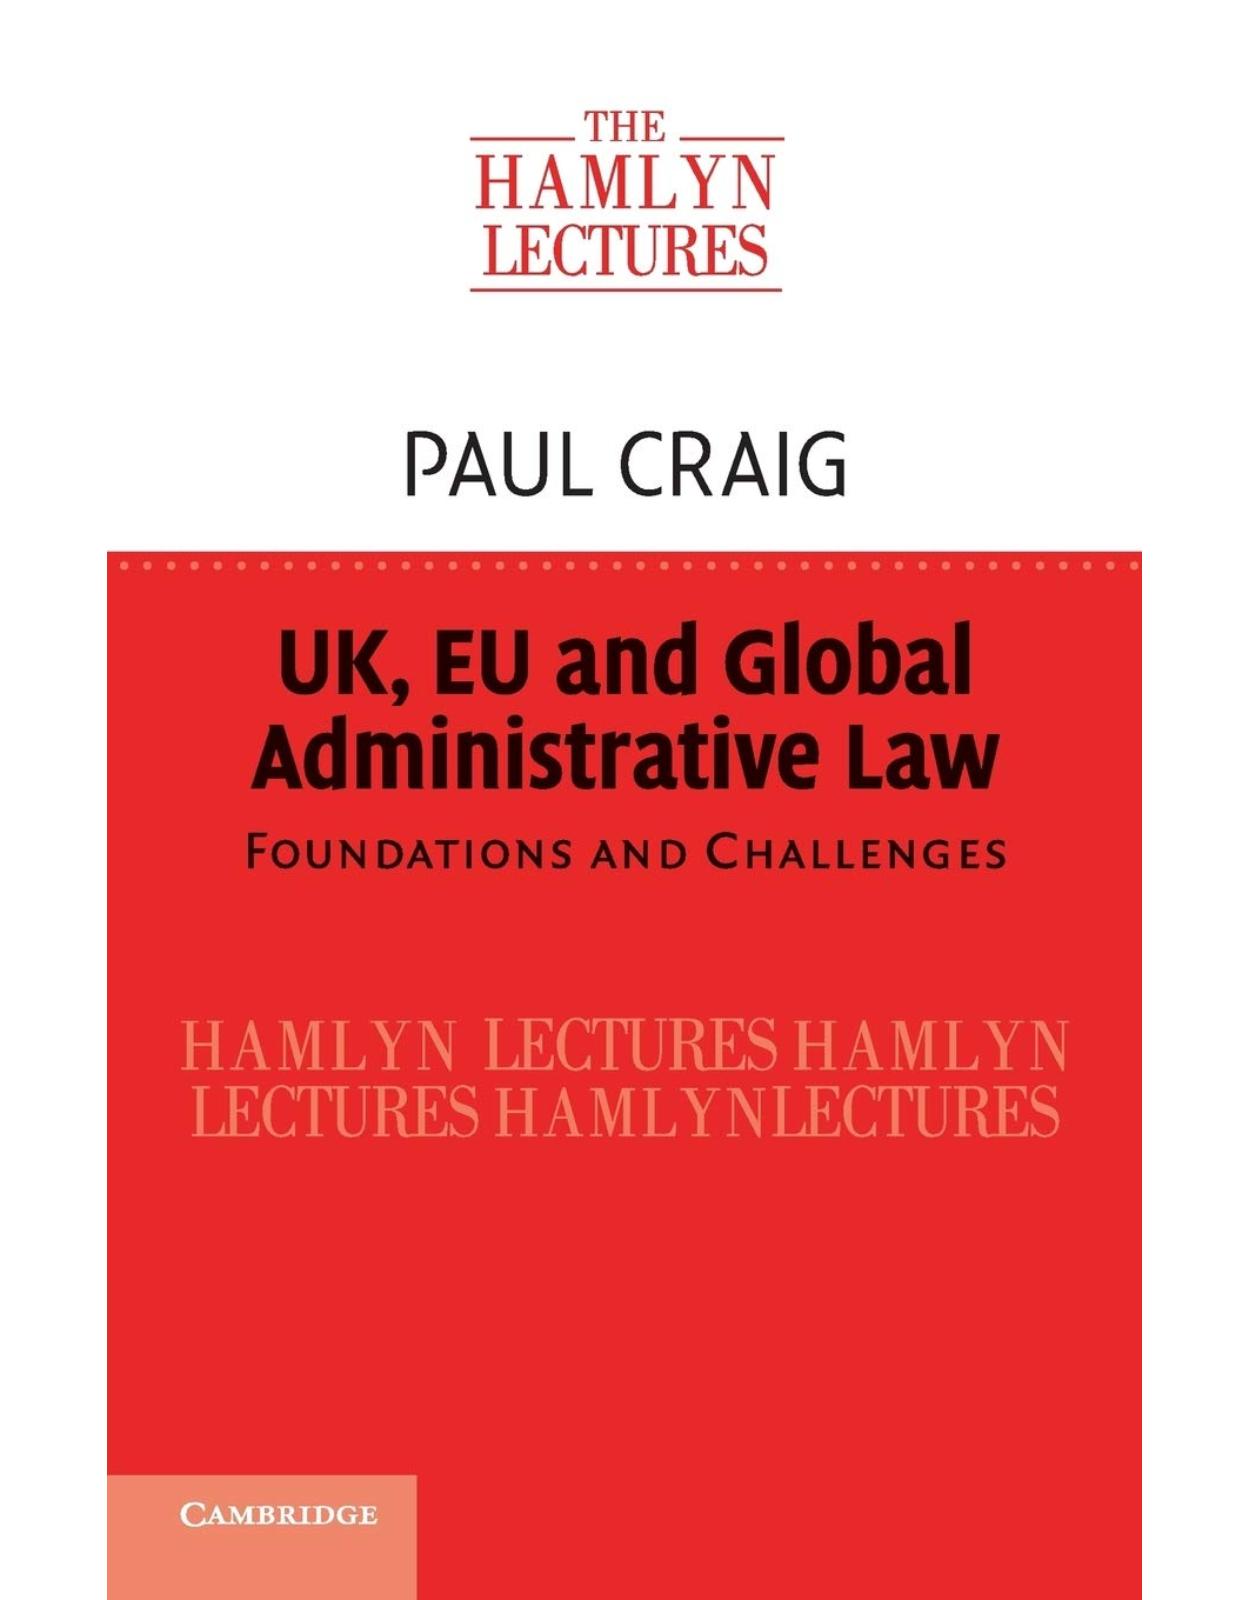 UK, EU and Global Administrative Law: Foundations and Challenges